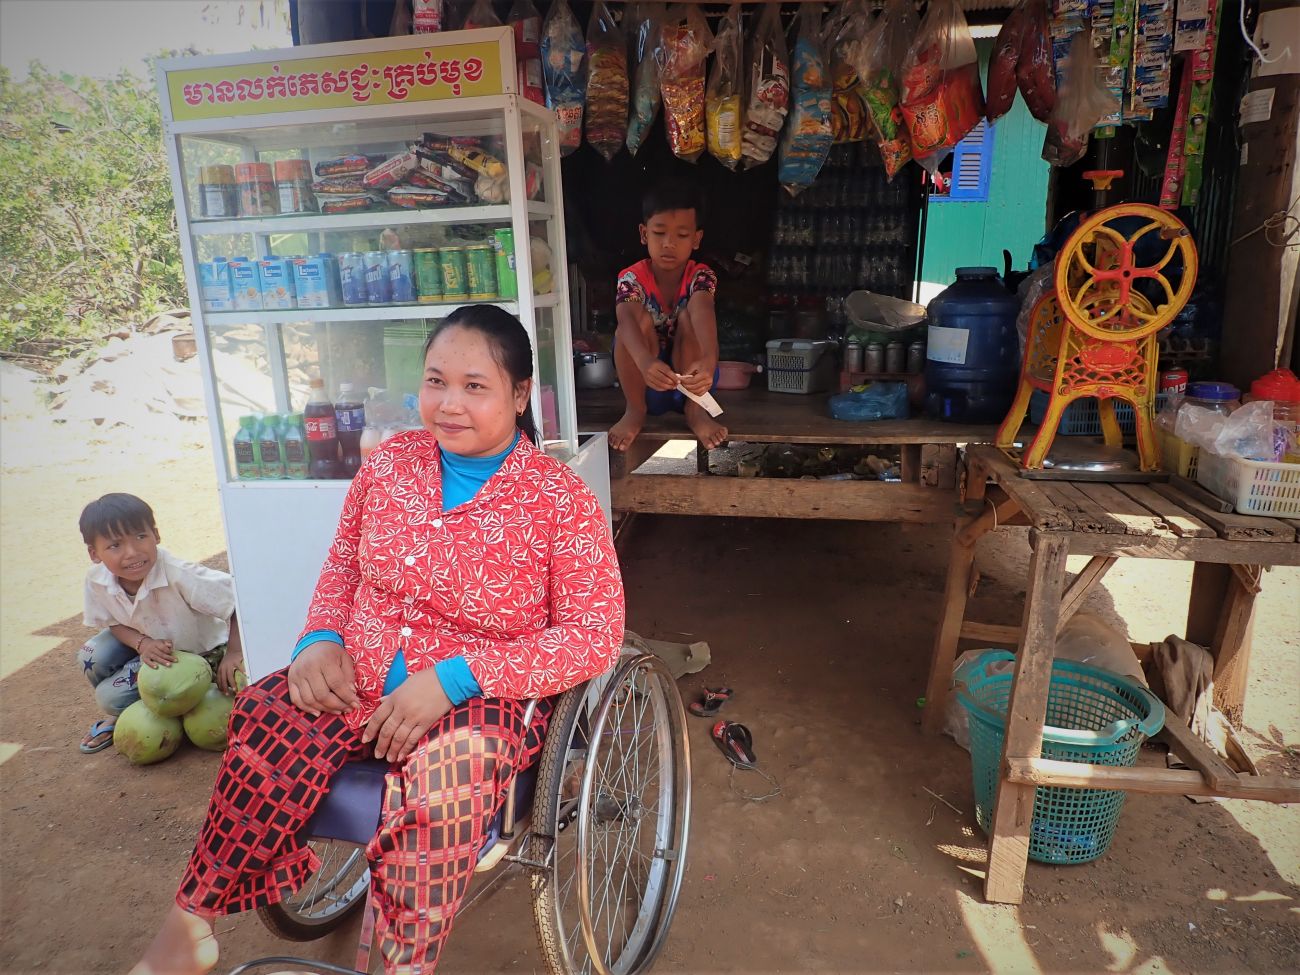 Min Sokly sells drinks and food in her small stall, opened with the support of HI. The young woman is in front in a wheelchair surrounded by two children.